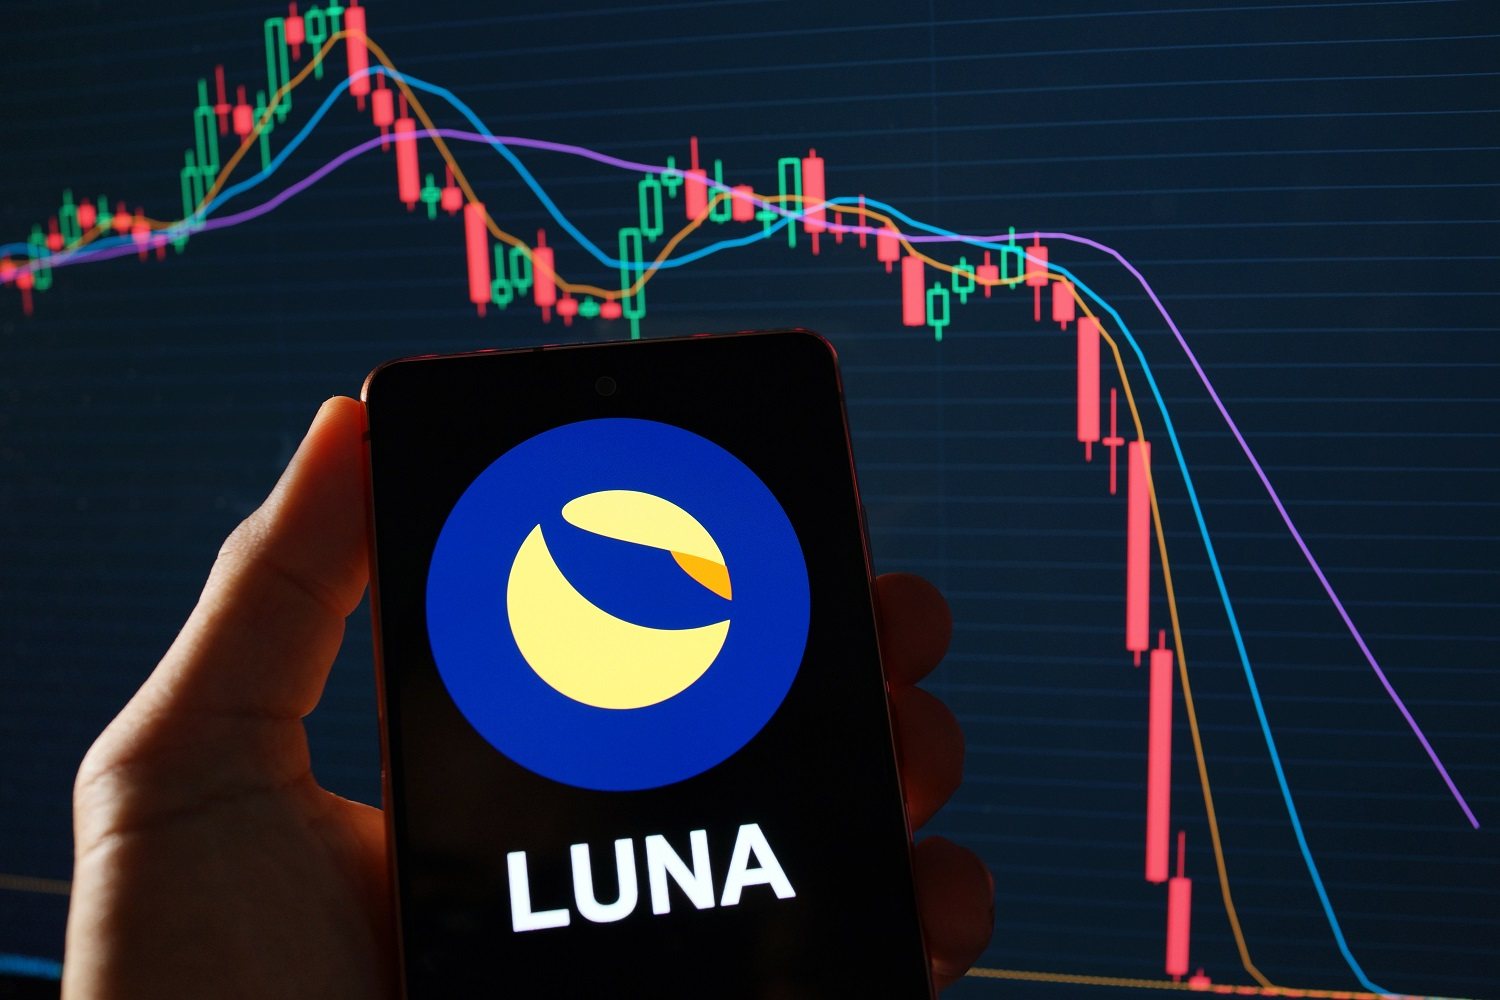 Terra Luna Price is Going to Zero as Global Investors Abandon the Coin for This New AI Crypto Project – How Does it Work?